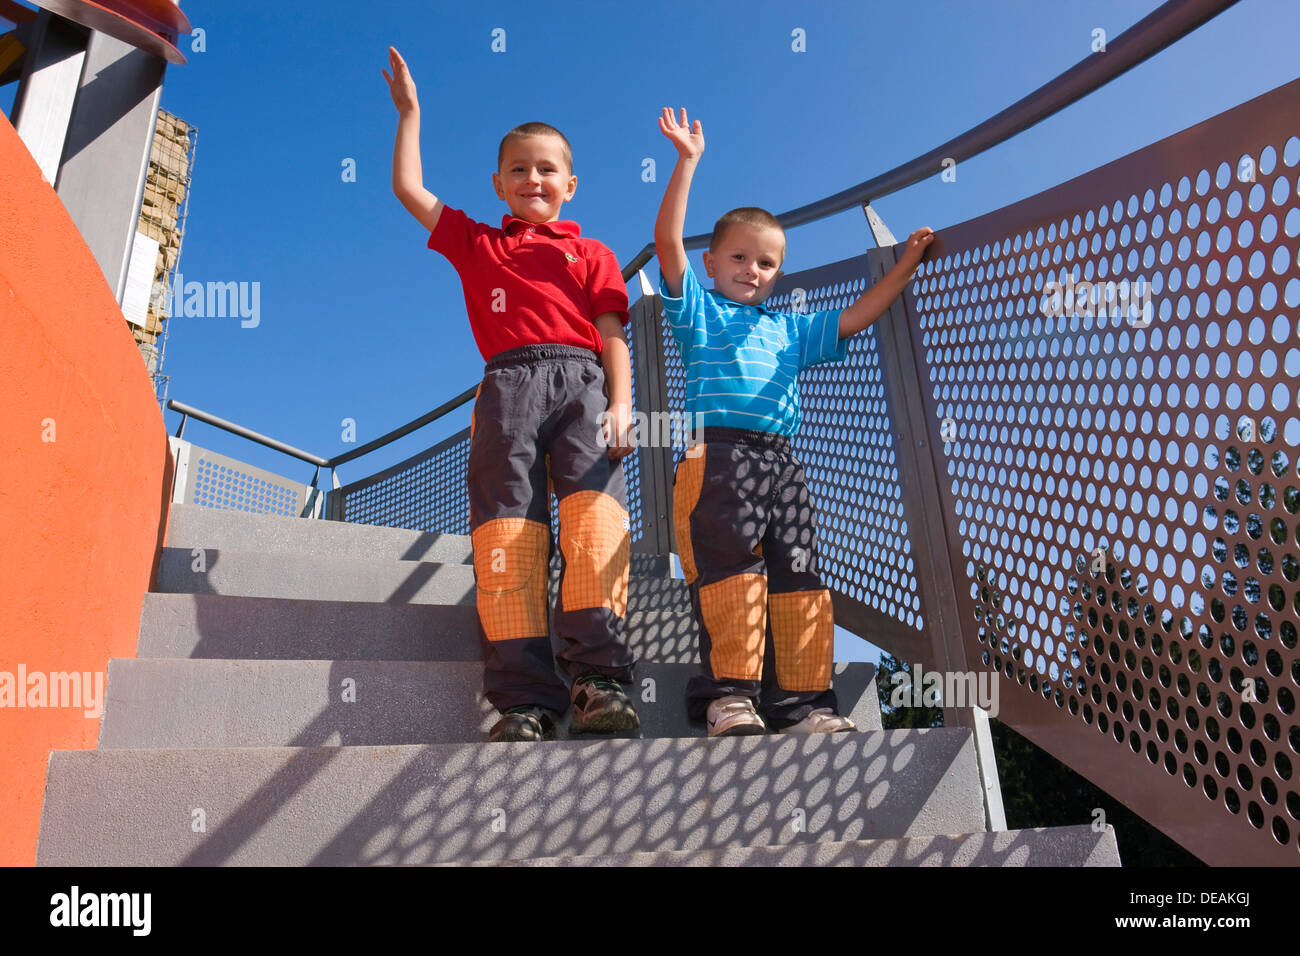 Boys, 6 and 4 years, on a staircase Stock Photo